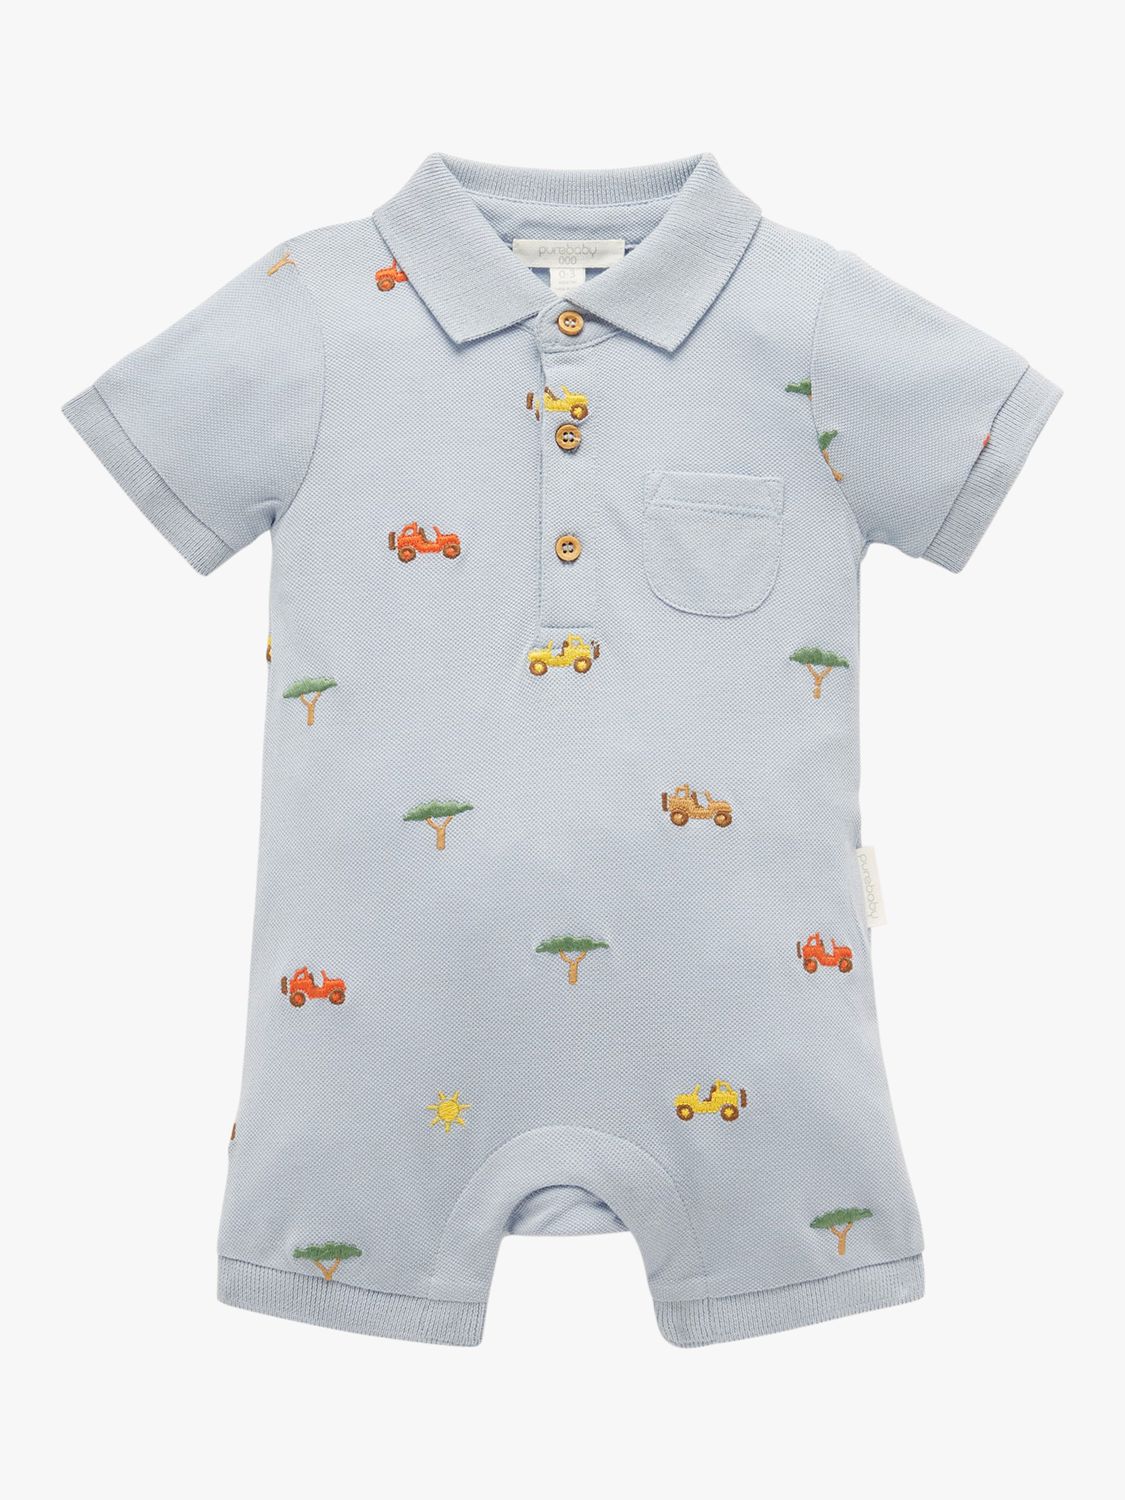 Buy Purebaby Baby Organic Cotton Polo Growsuit, Blue/Multi Online at johnlewis.com